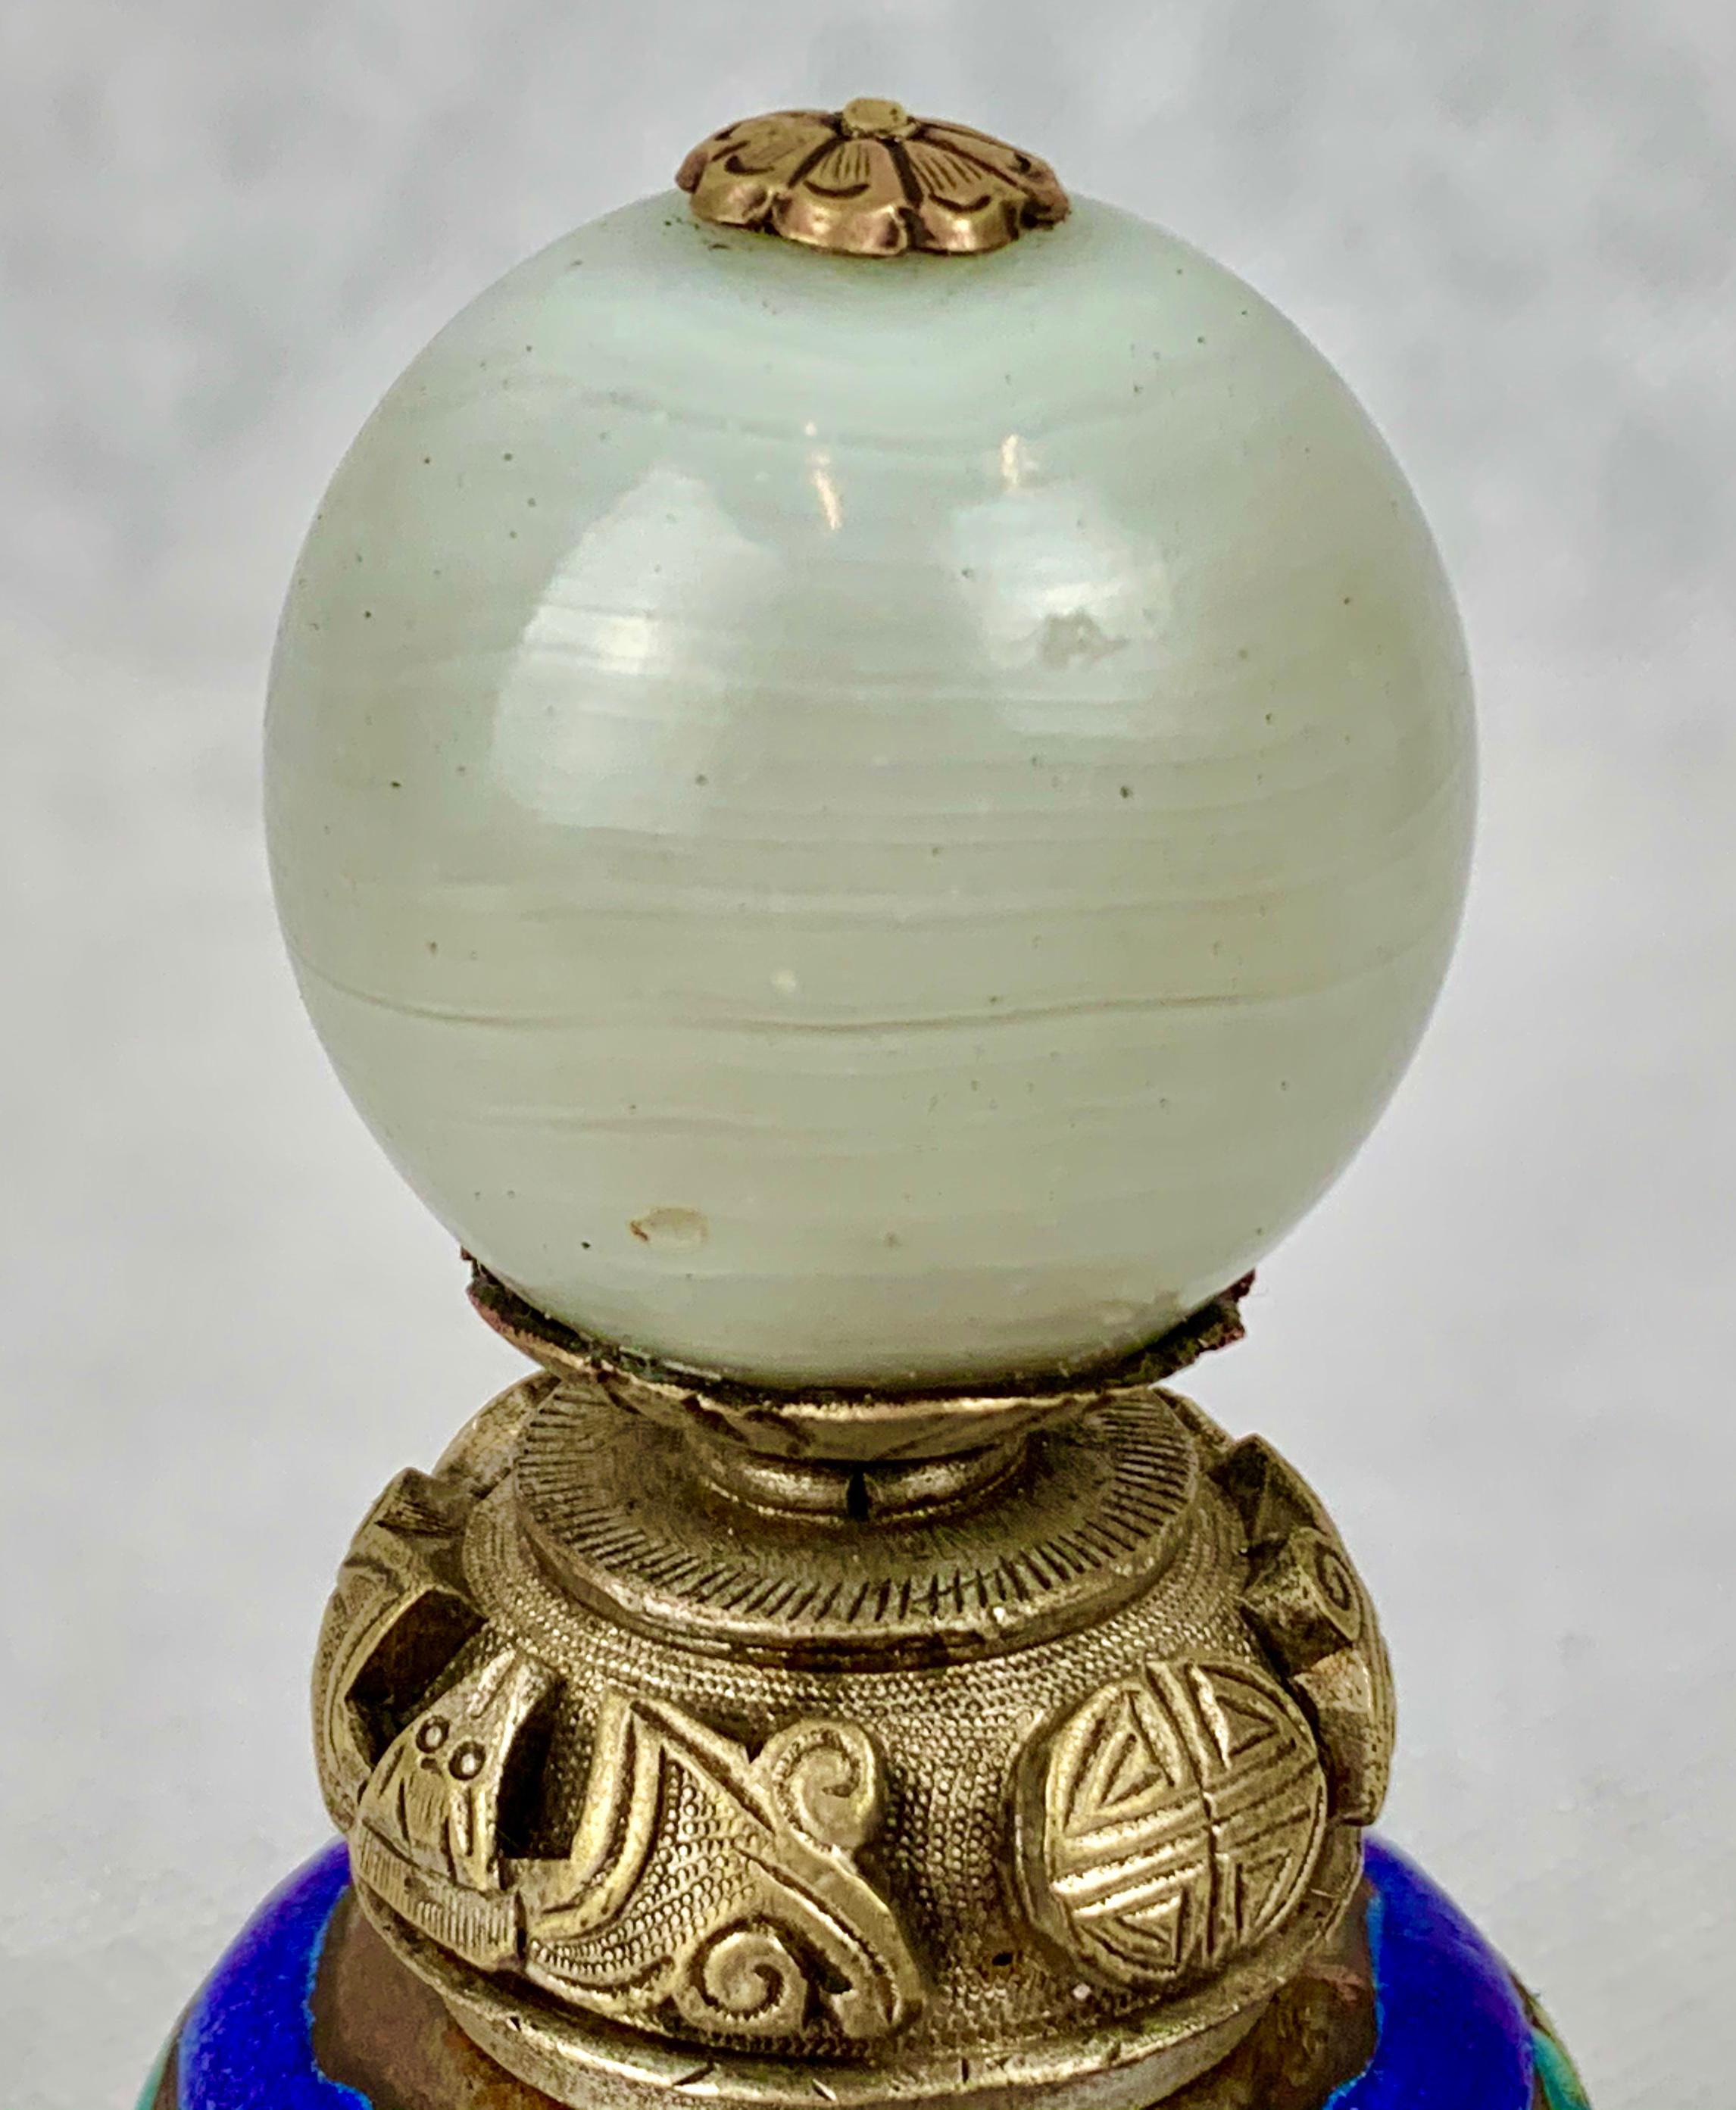 Chinese silver on copper enameled bell with peking glass finial and clapper. Some refer to these items as dinner bells, however, a great colorful collectable from old China. Originally a mandarin's hat button now repurposed as a bell.

Hand cleaned